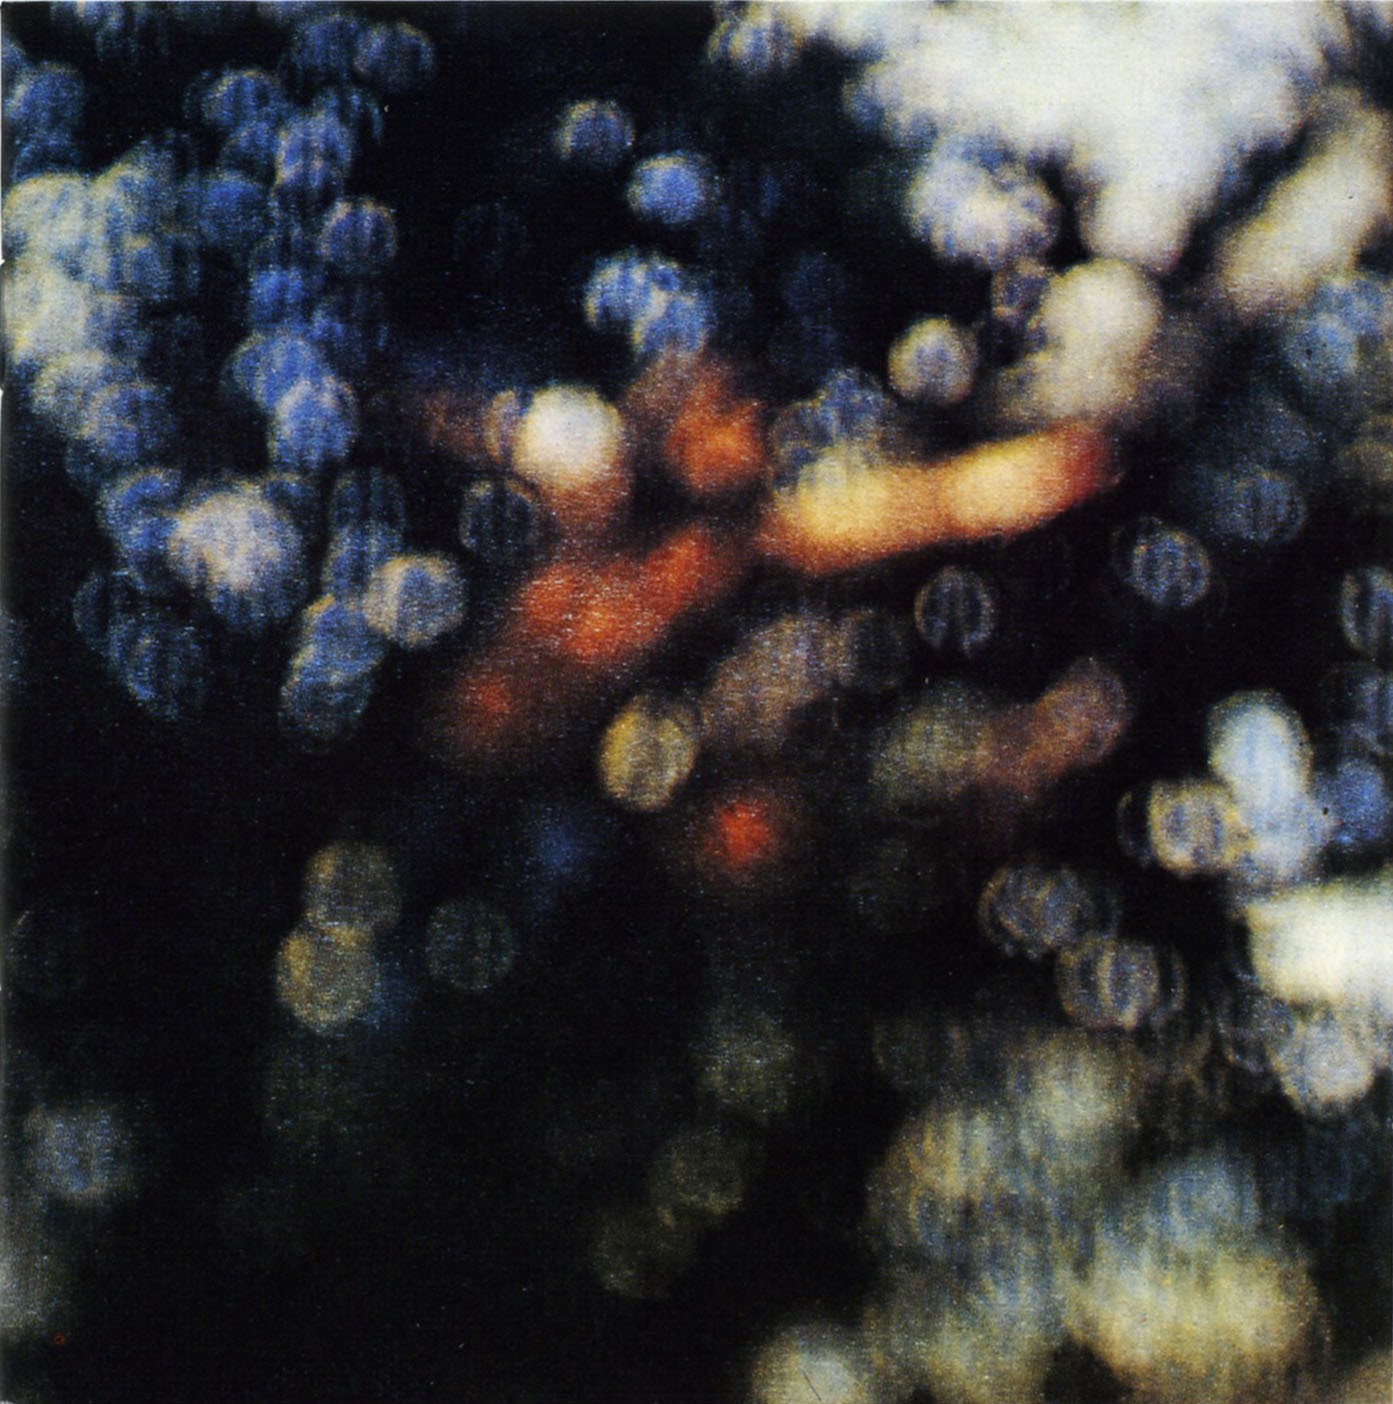 Obscured By Clouds